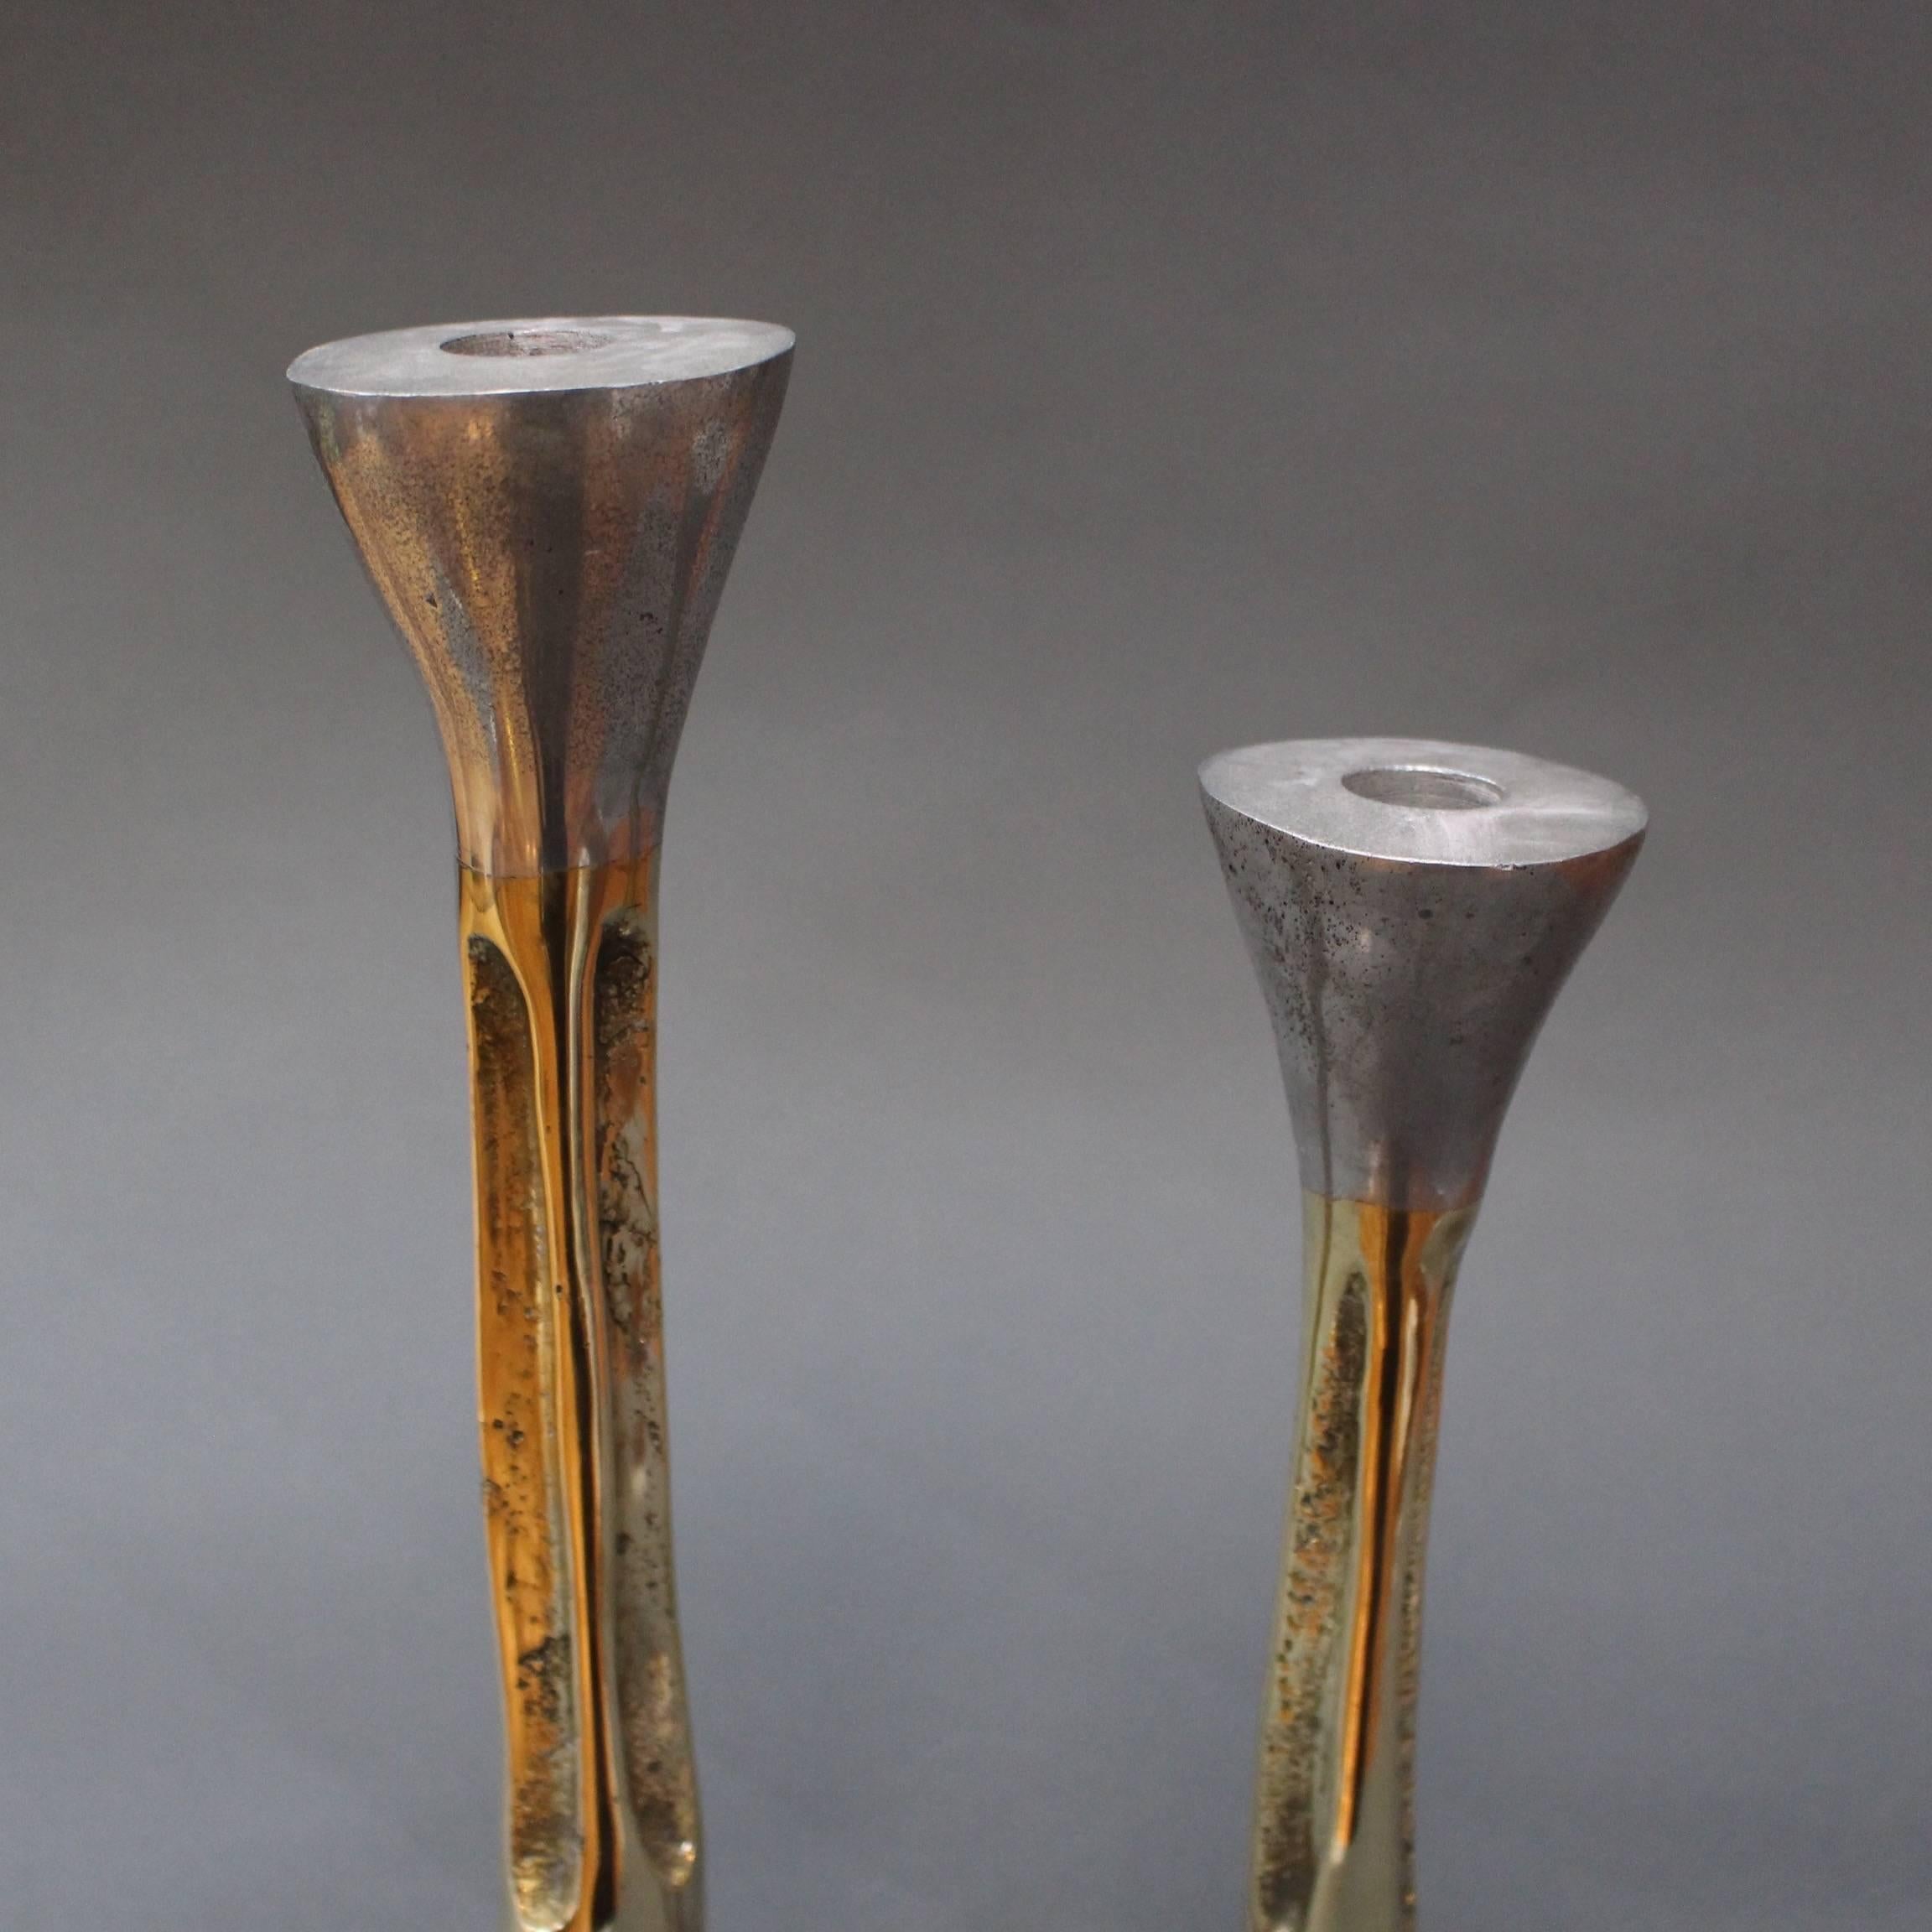 Late 20th Century Pair of Brutalist Style Aluminium and Brass Candlesticks by David Marshall 1980s